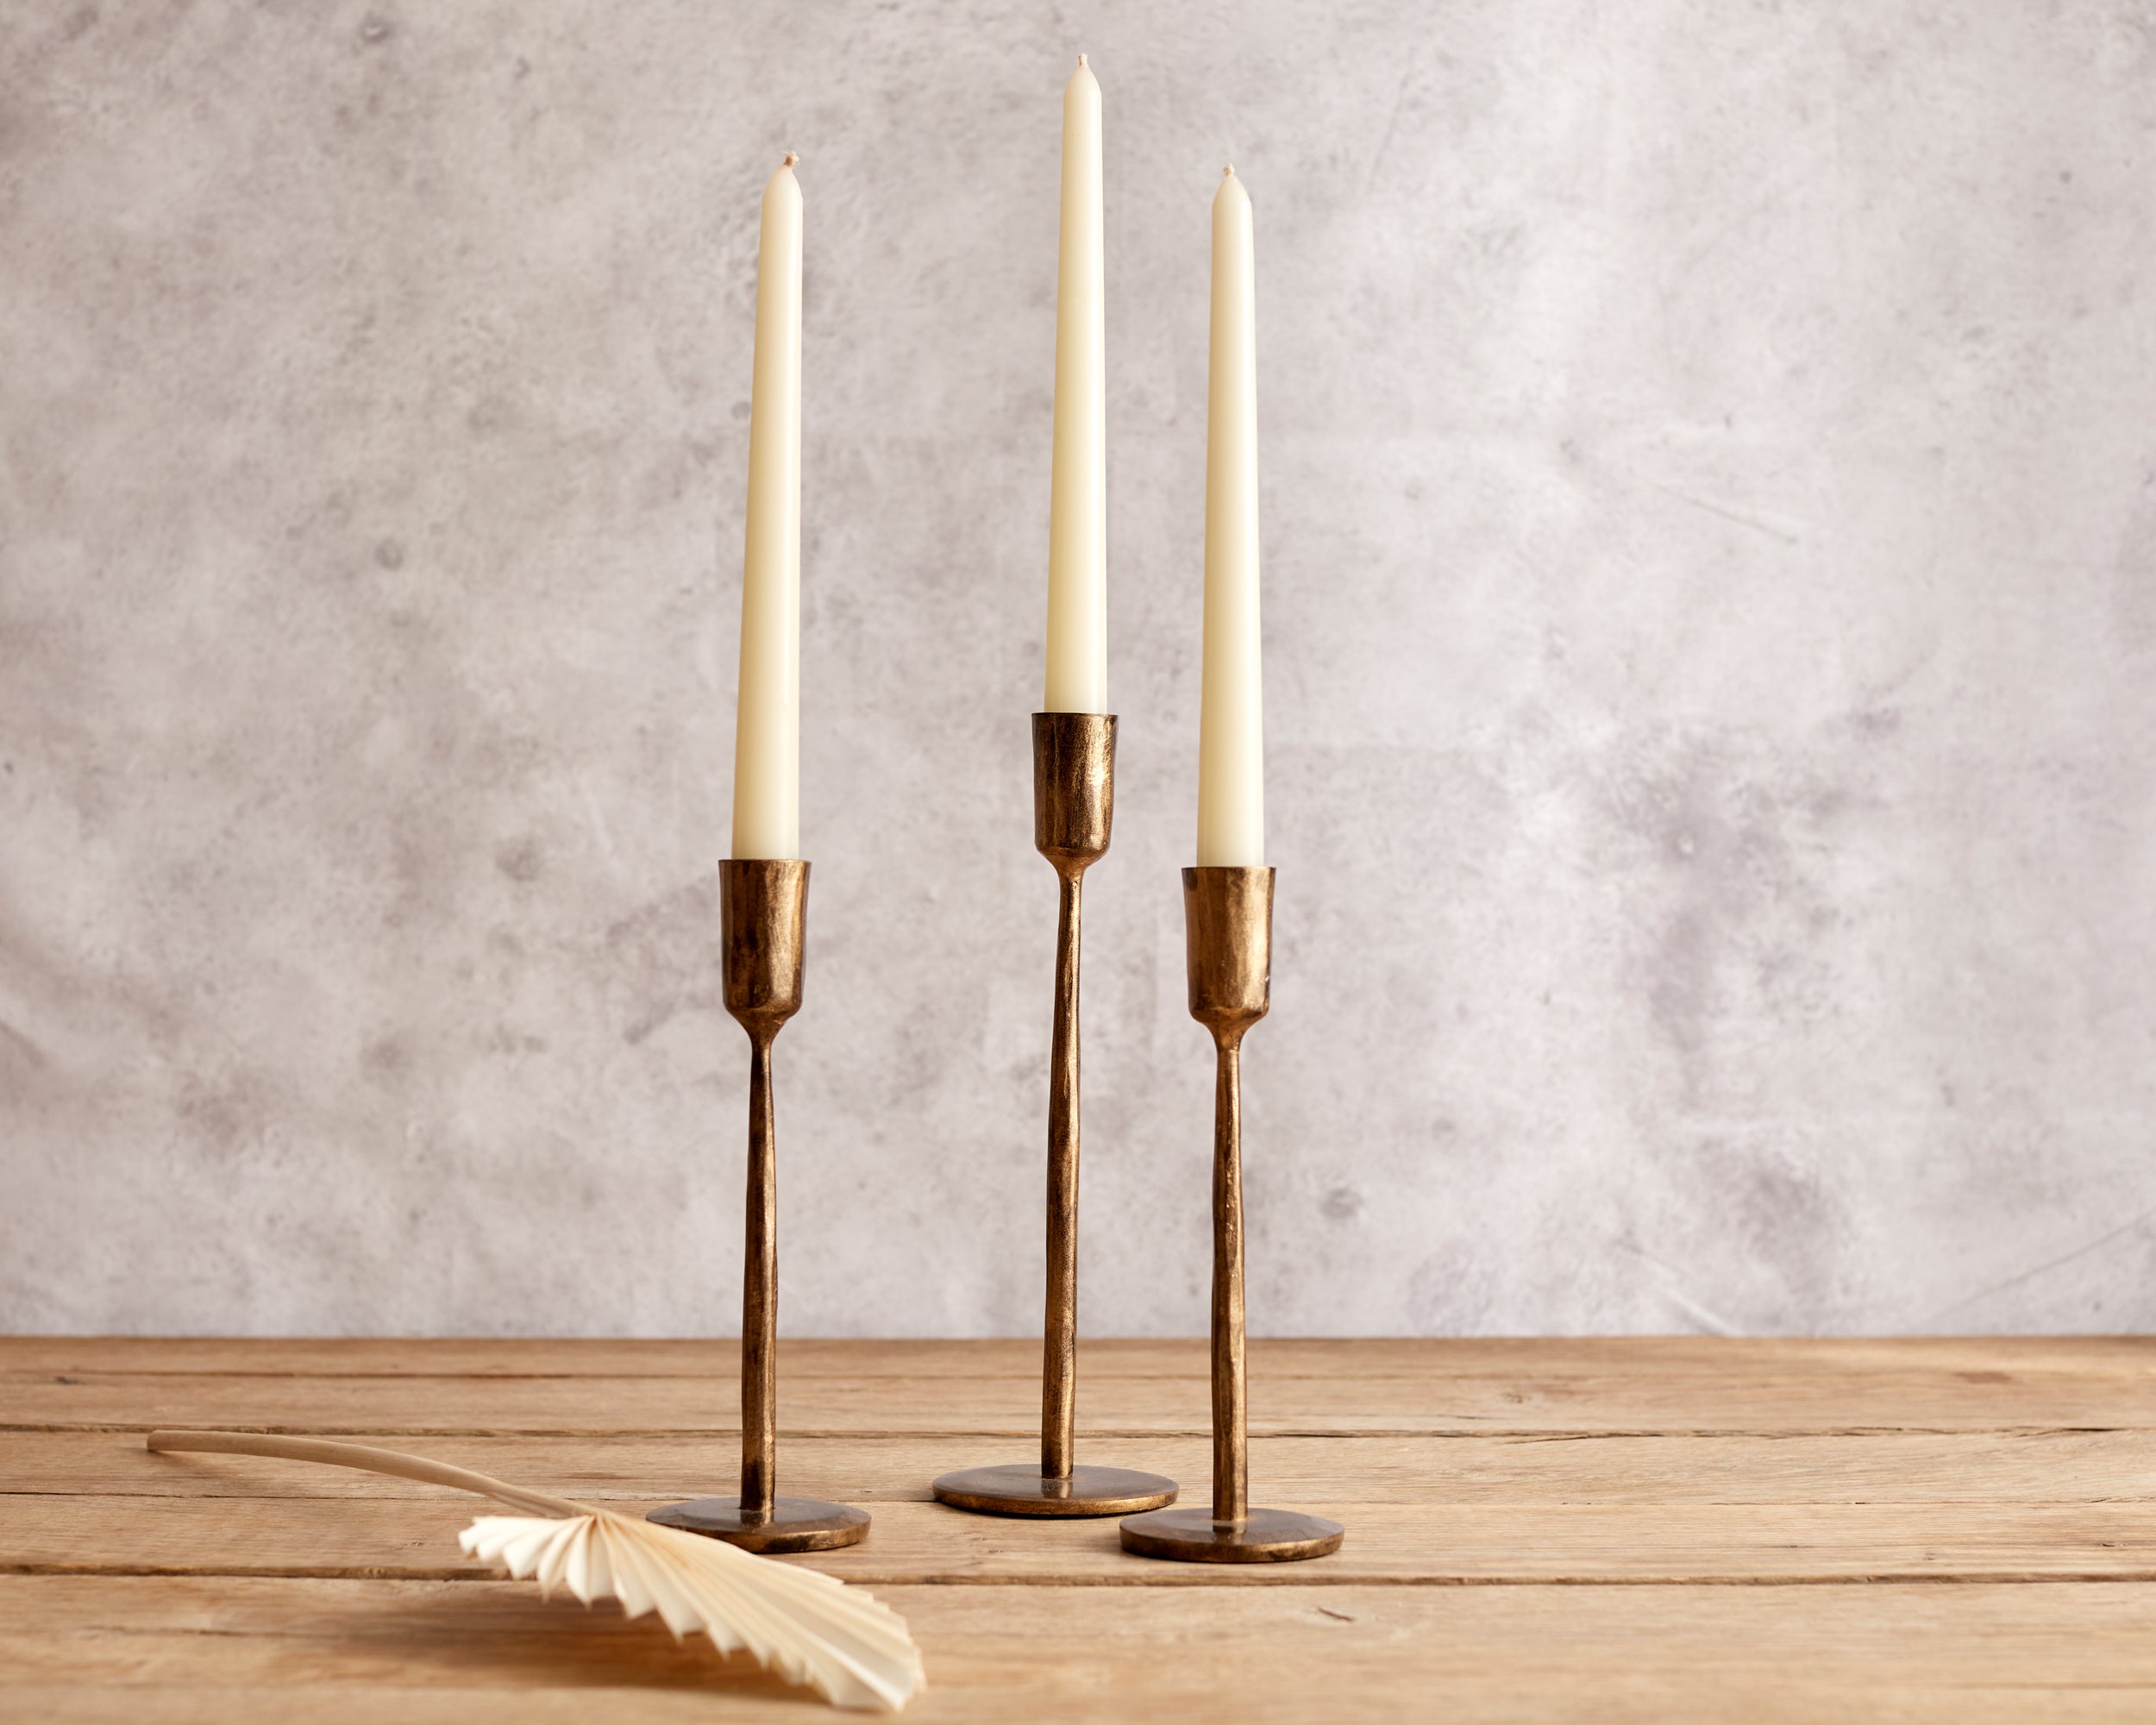 Iron brass gold candle holders from What a Host Home Decor